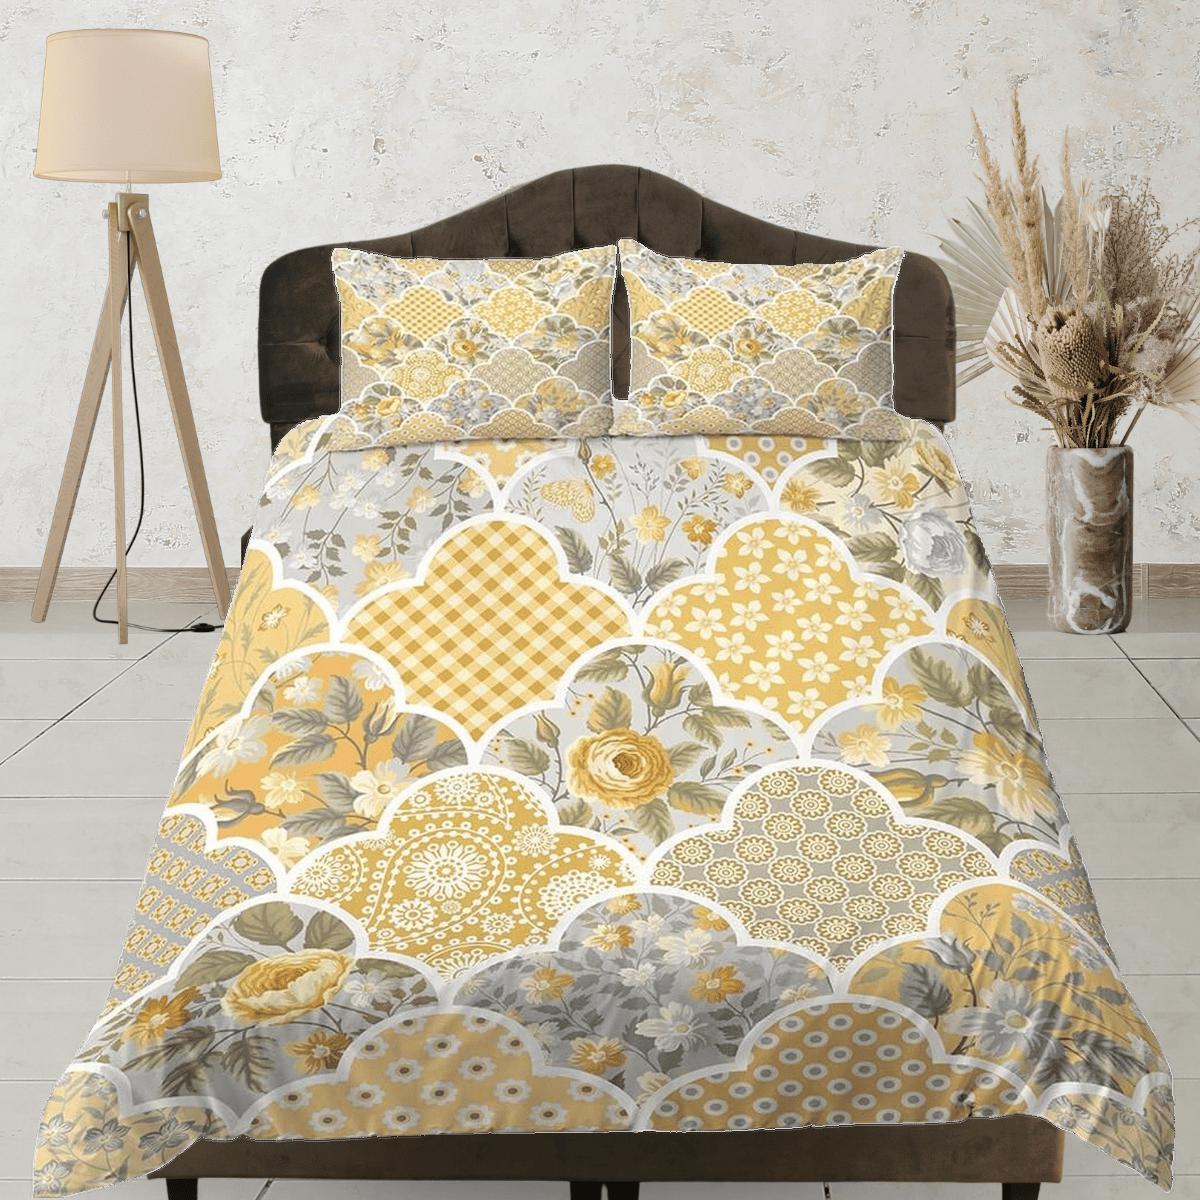 daintyduvet Yellow floral shabby chic patchwork quilt printed duvet cover set, aesthetic room decor bedding set full, king, queen size, boho bedspread